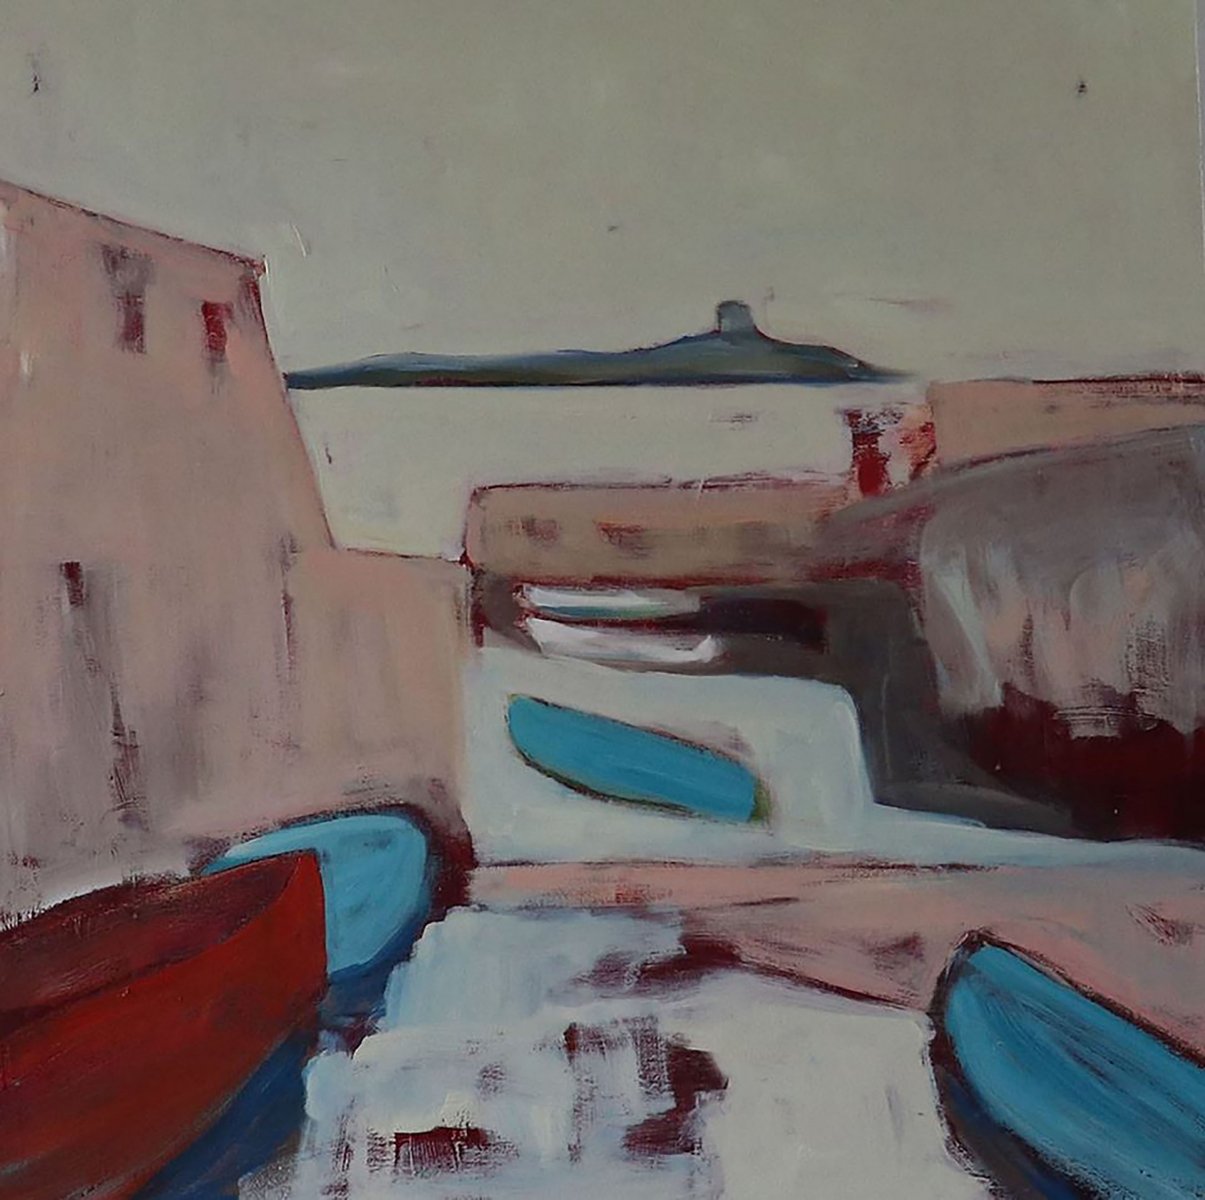 Joes-Boat-Oil-on-canvas-80cm-x-80cm-2019-scaled